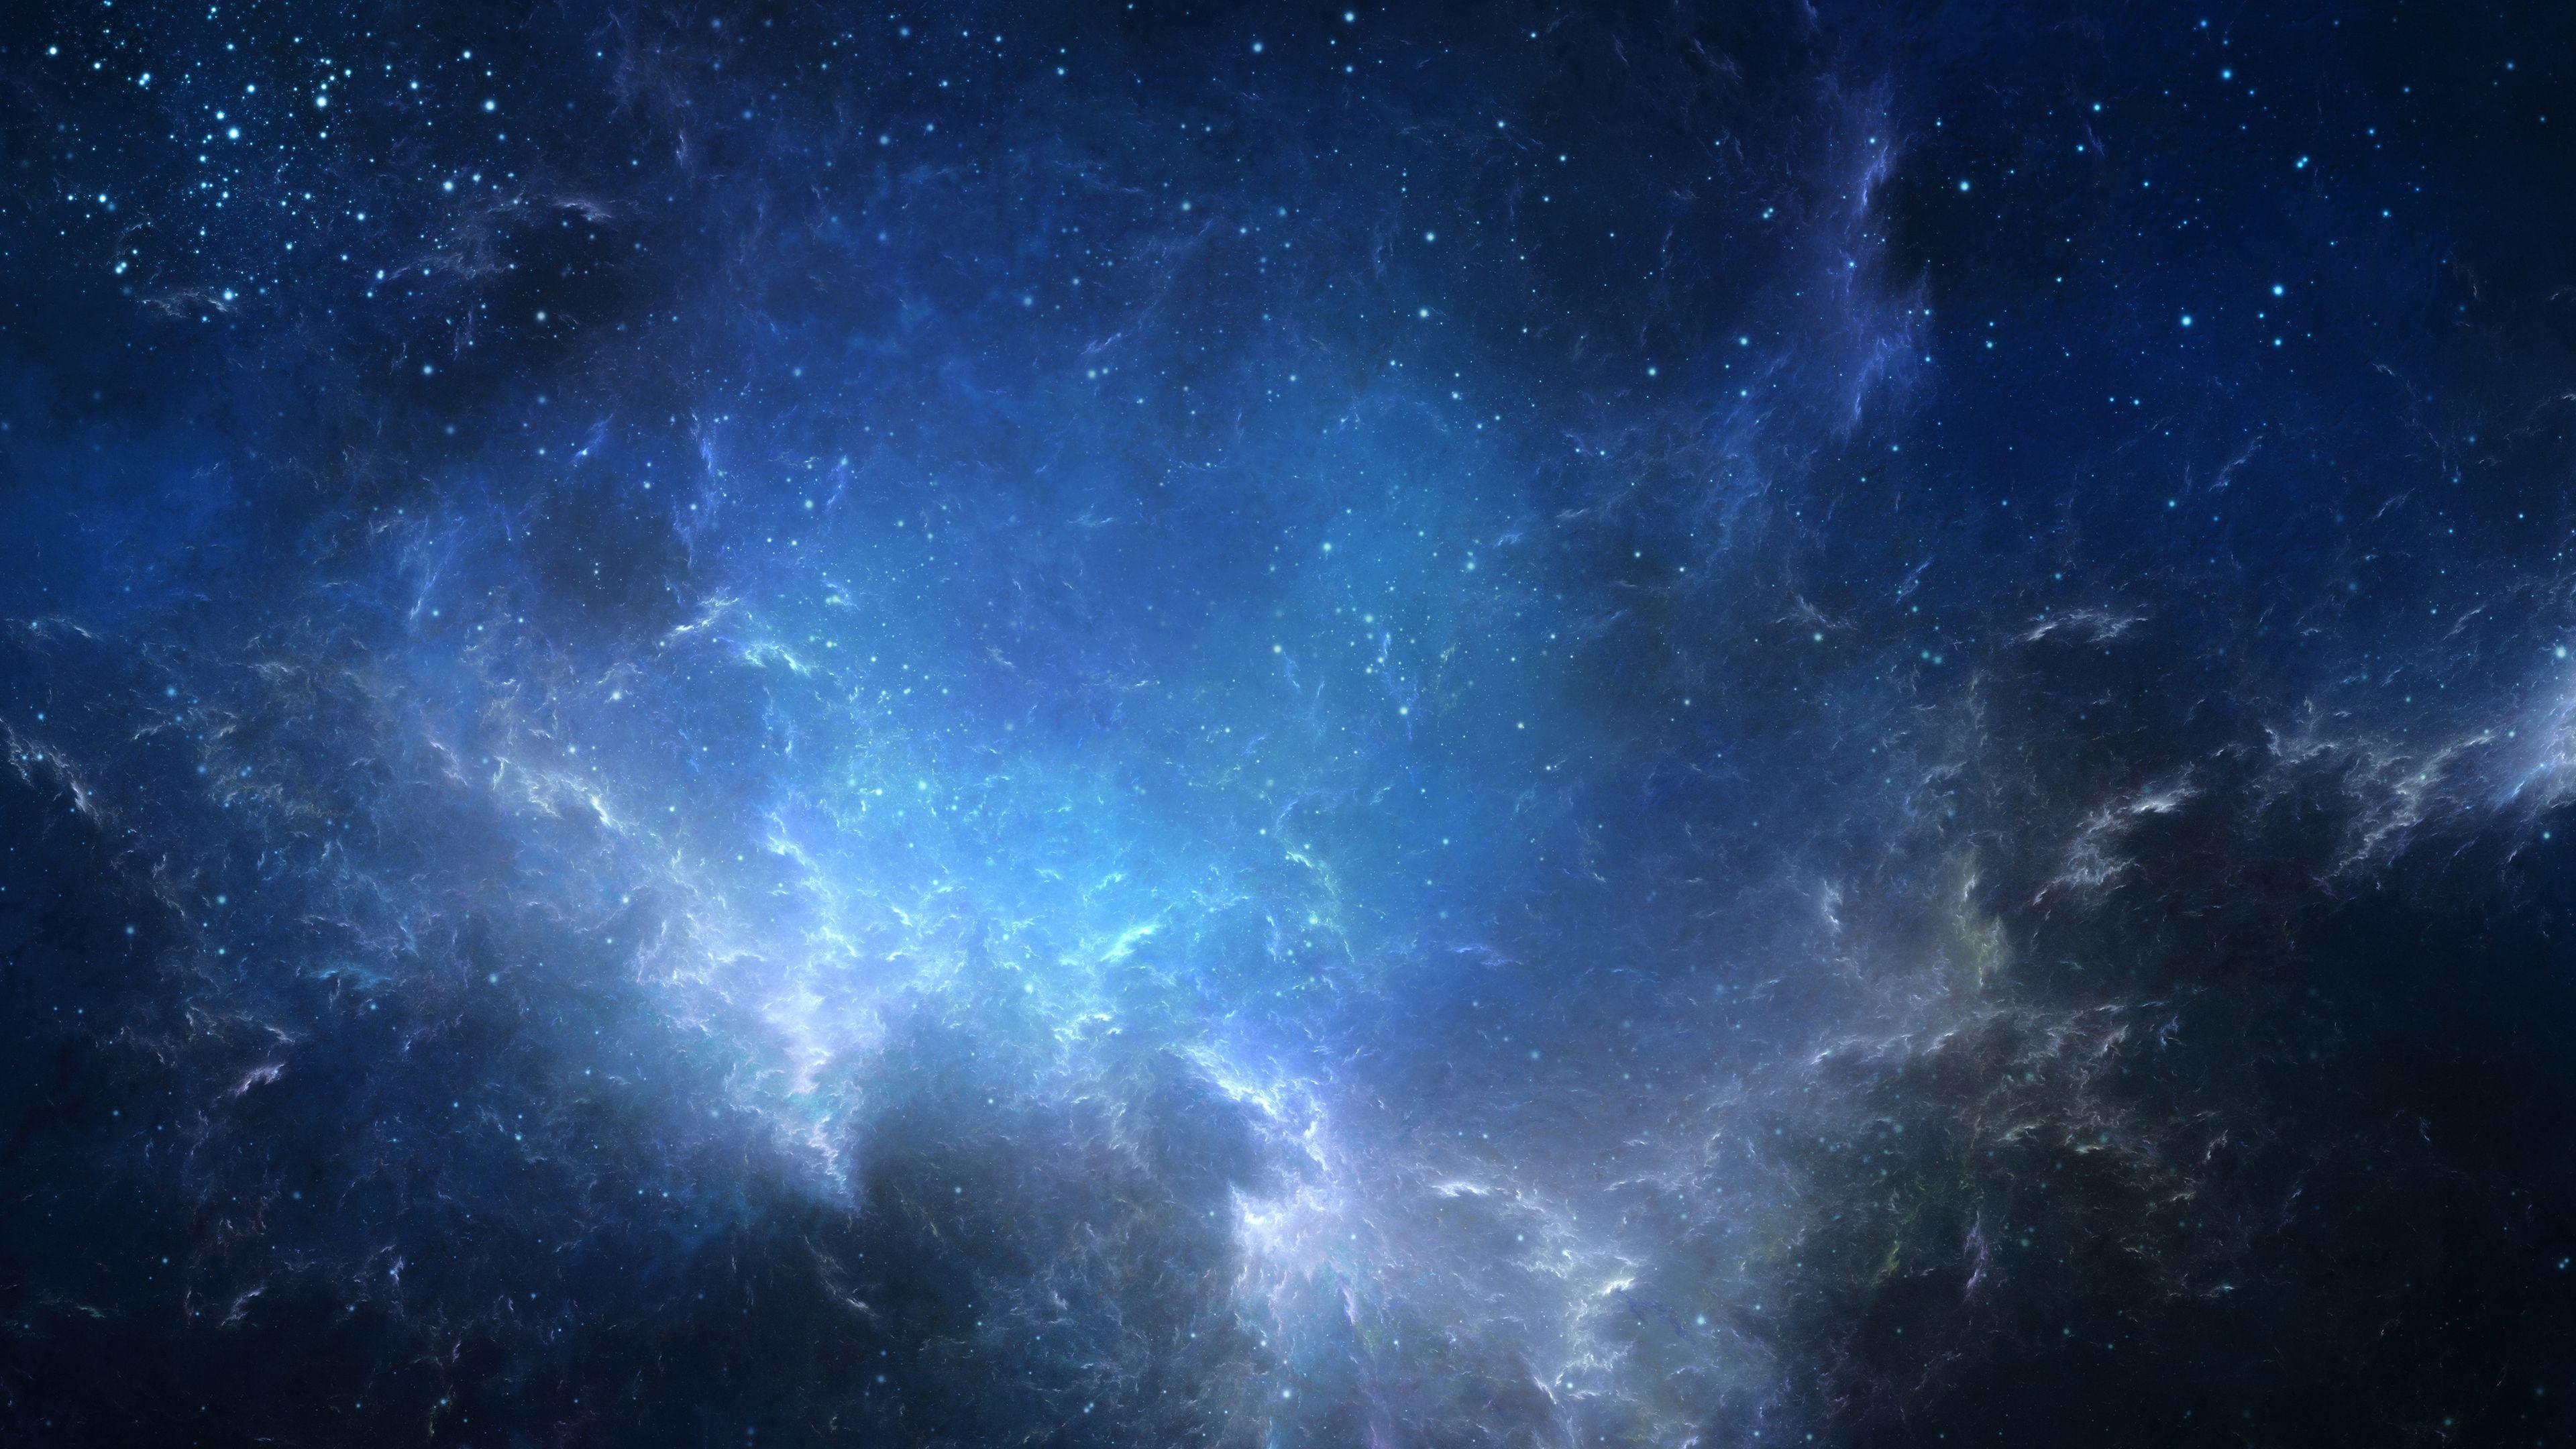 Universe Full HD PC Wallpapers  Top Free Universe Full HD PC Backgrounds   WallpaperAccess